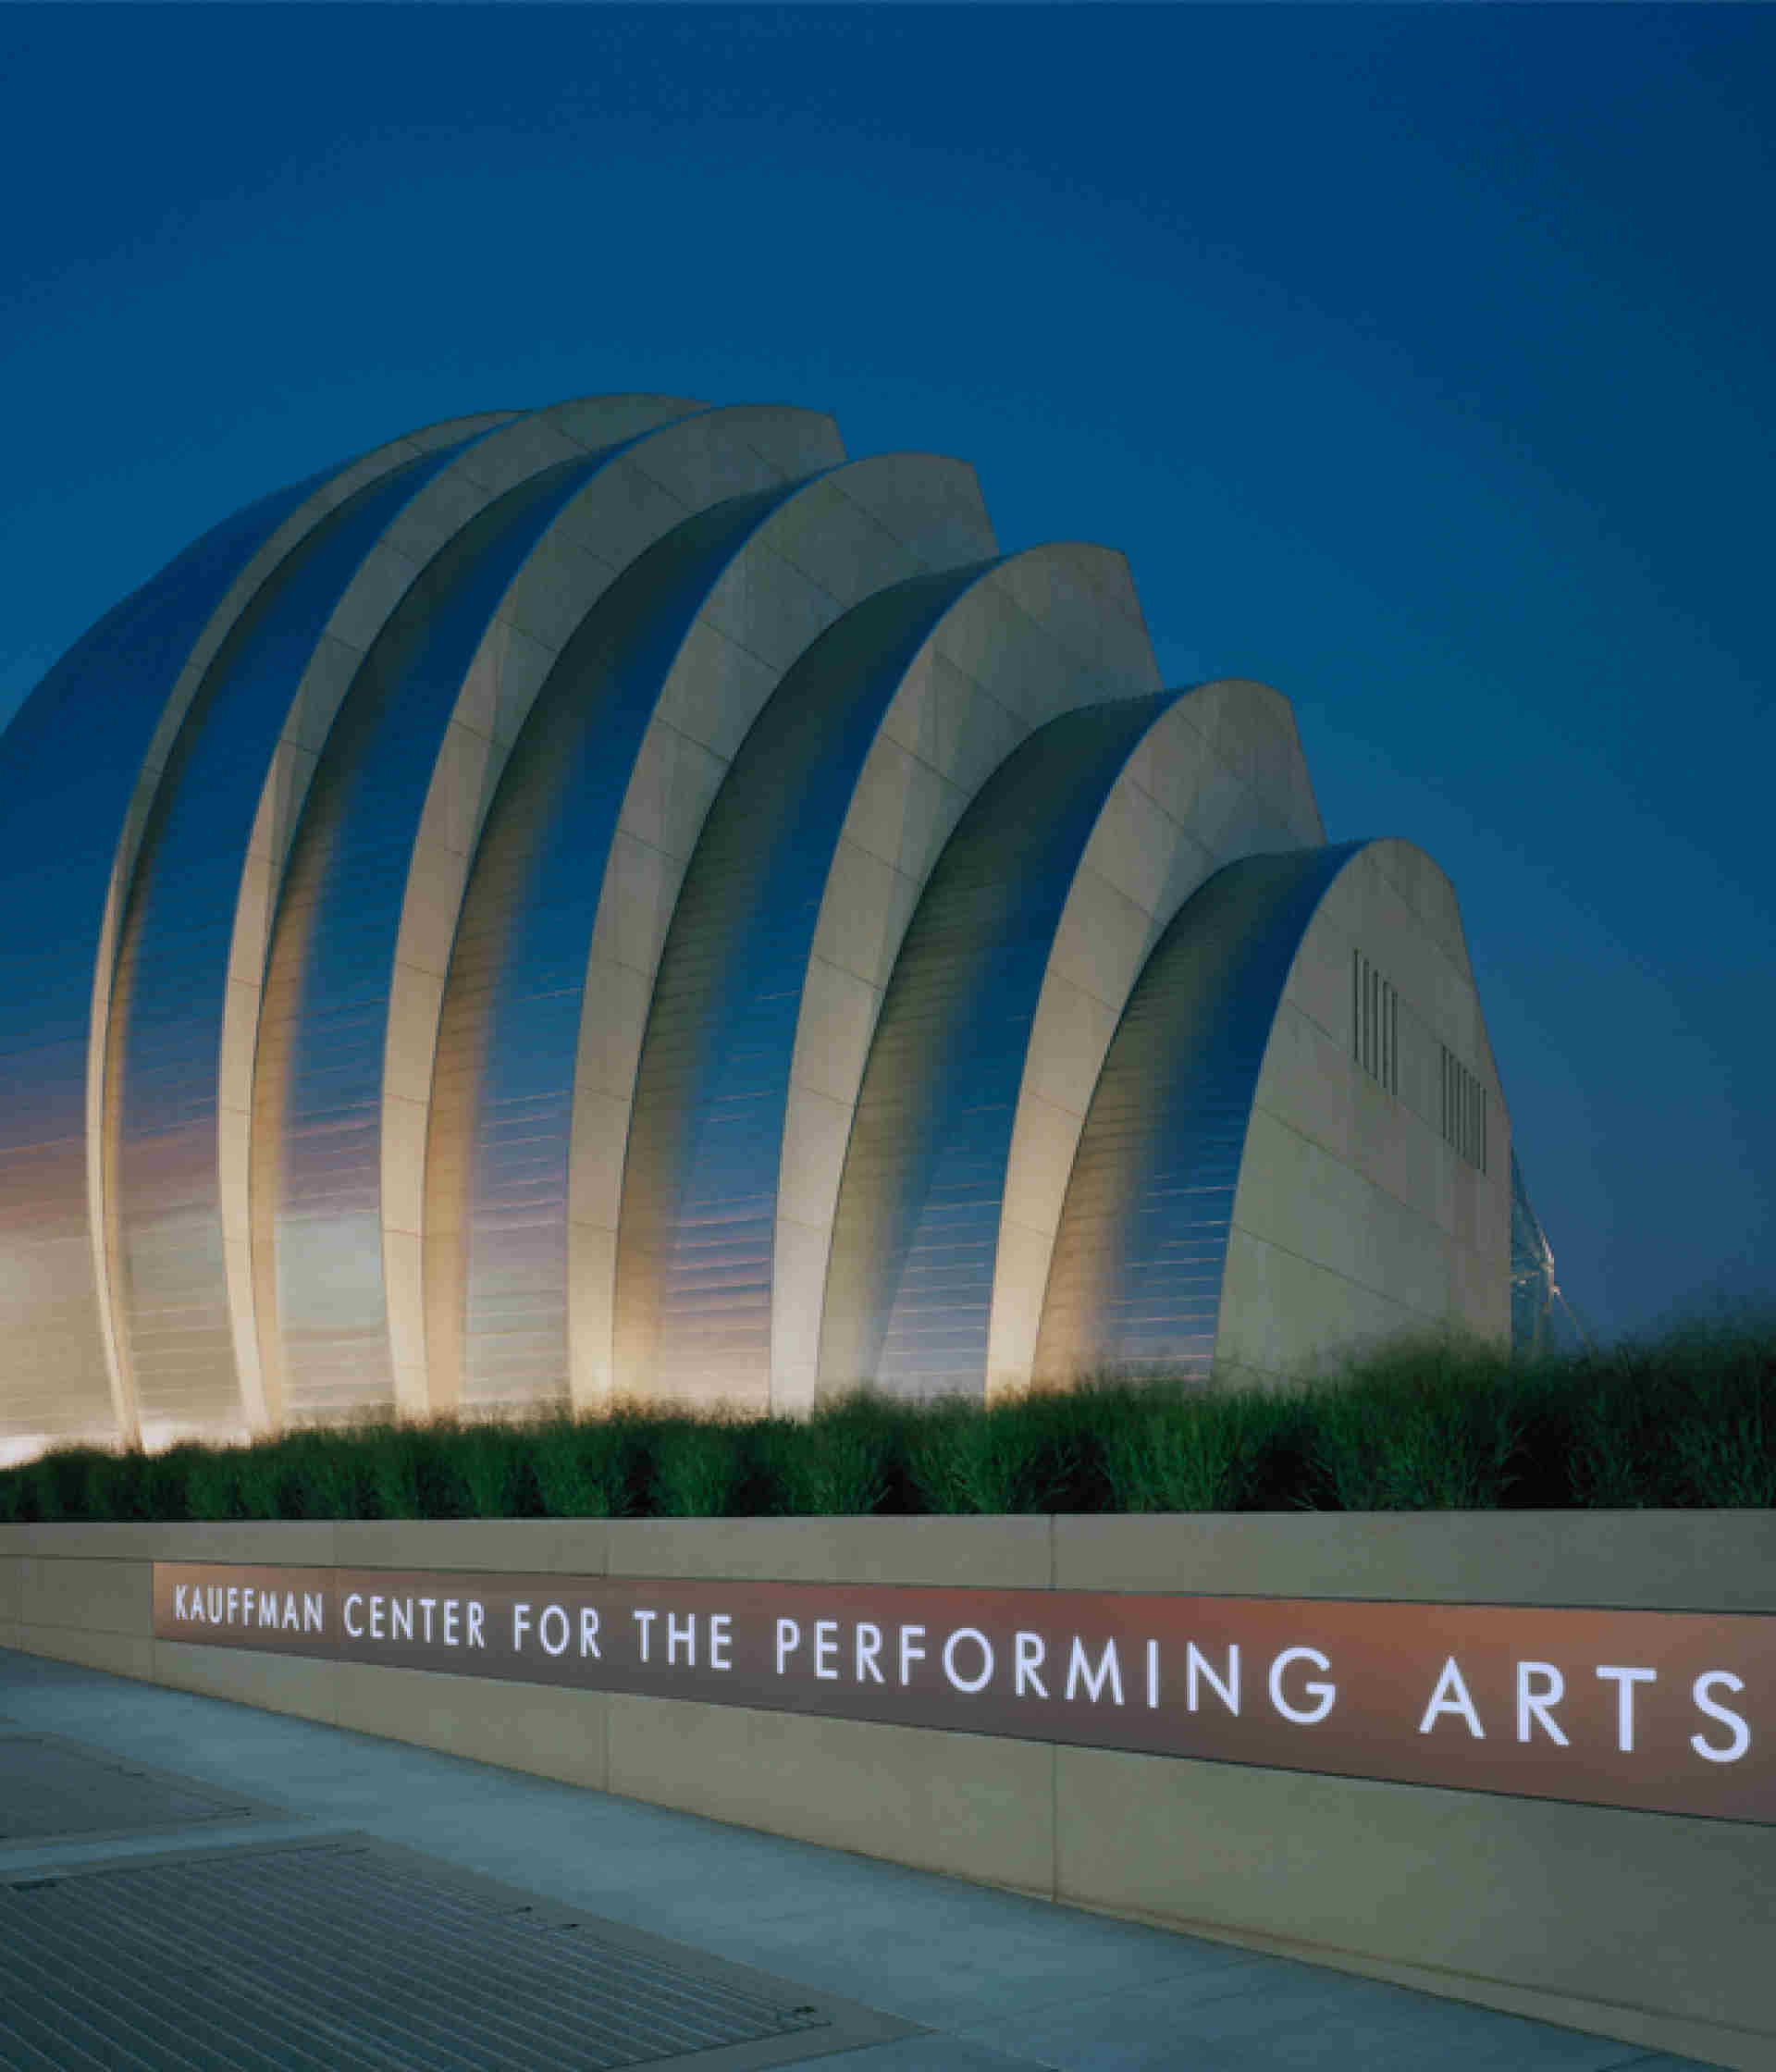 Kauffman Center for the Performing Arts - kauffman-center-for-the-performing-arts_624x728